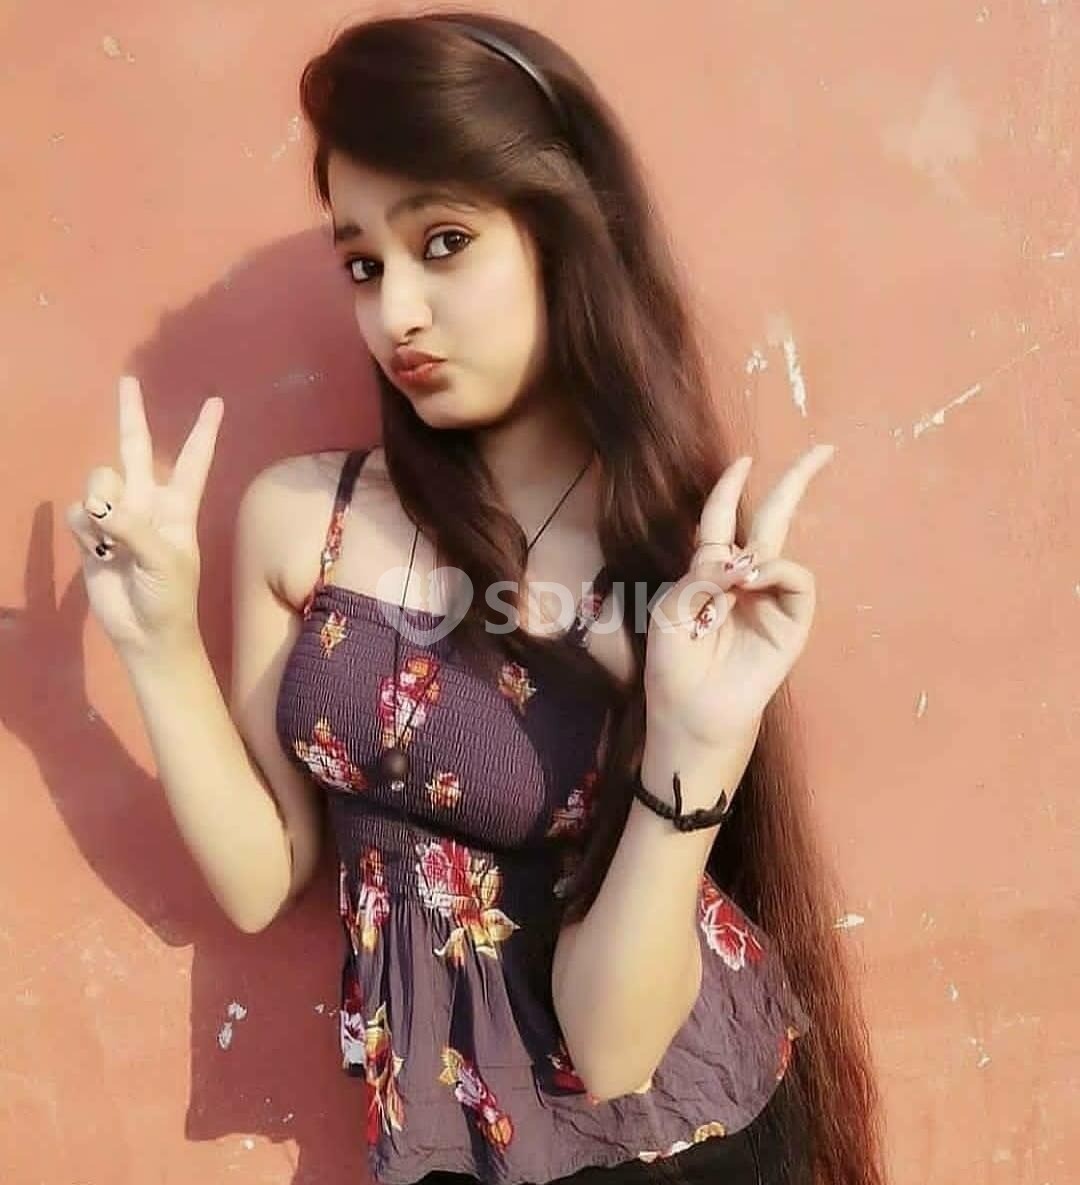 Dwarka LOW PRICE🔸k✅( 24×7 ) SERVICE A AVAILABLE 100% SAFE AND S SECURE UNLIMITED ENJOY HOT COLLEGE GIRL HOUSEWIFE 